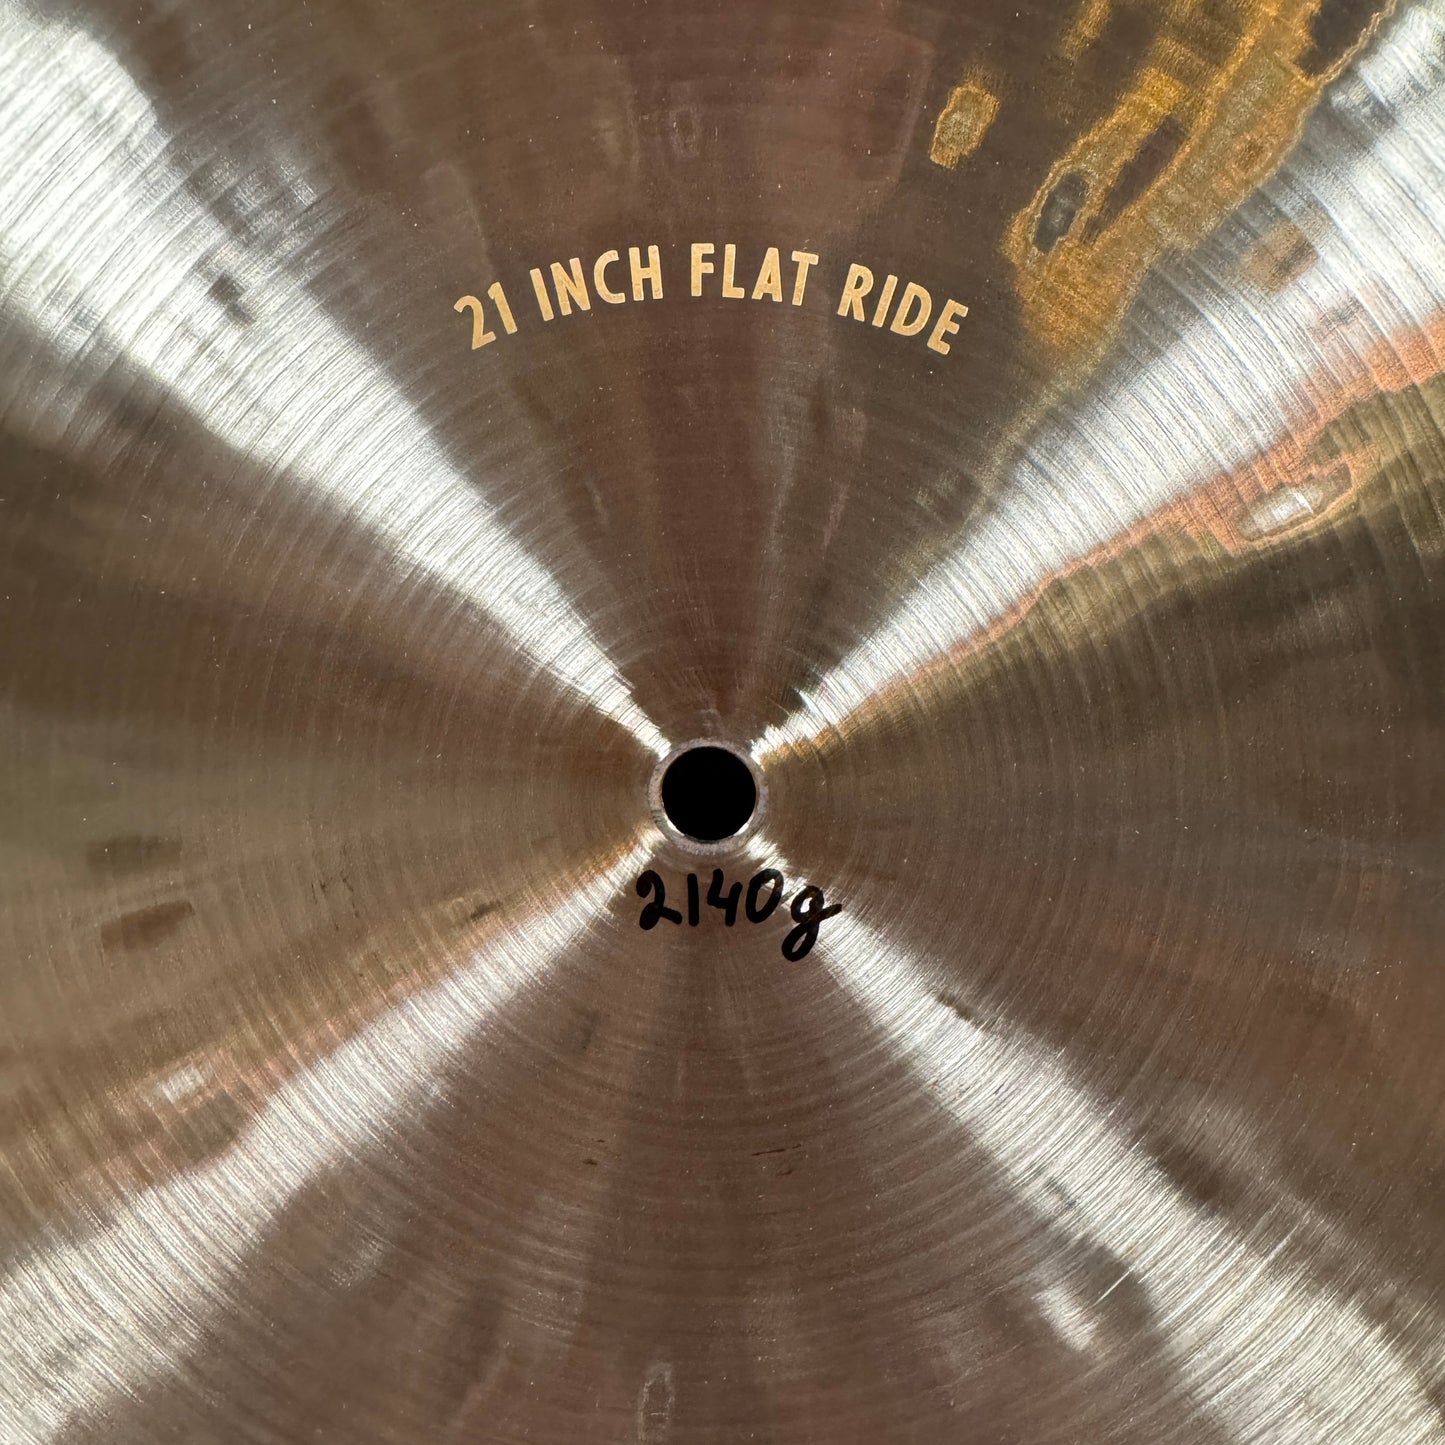 21" Meinl Byzance Foundry Reserve Flat Ride Cymbal 2140g *Video Demo*